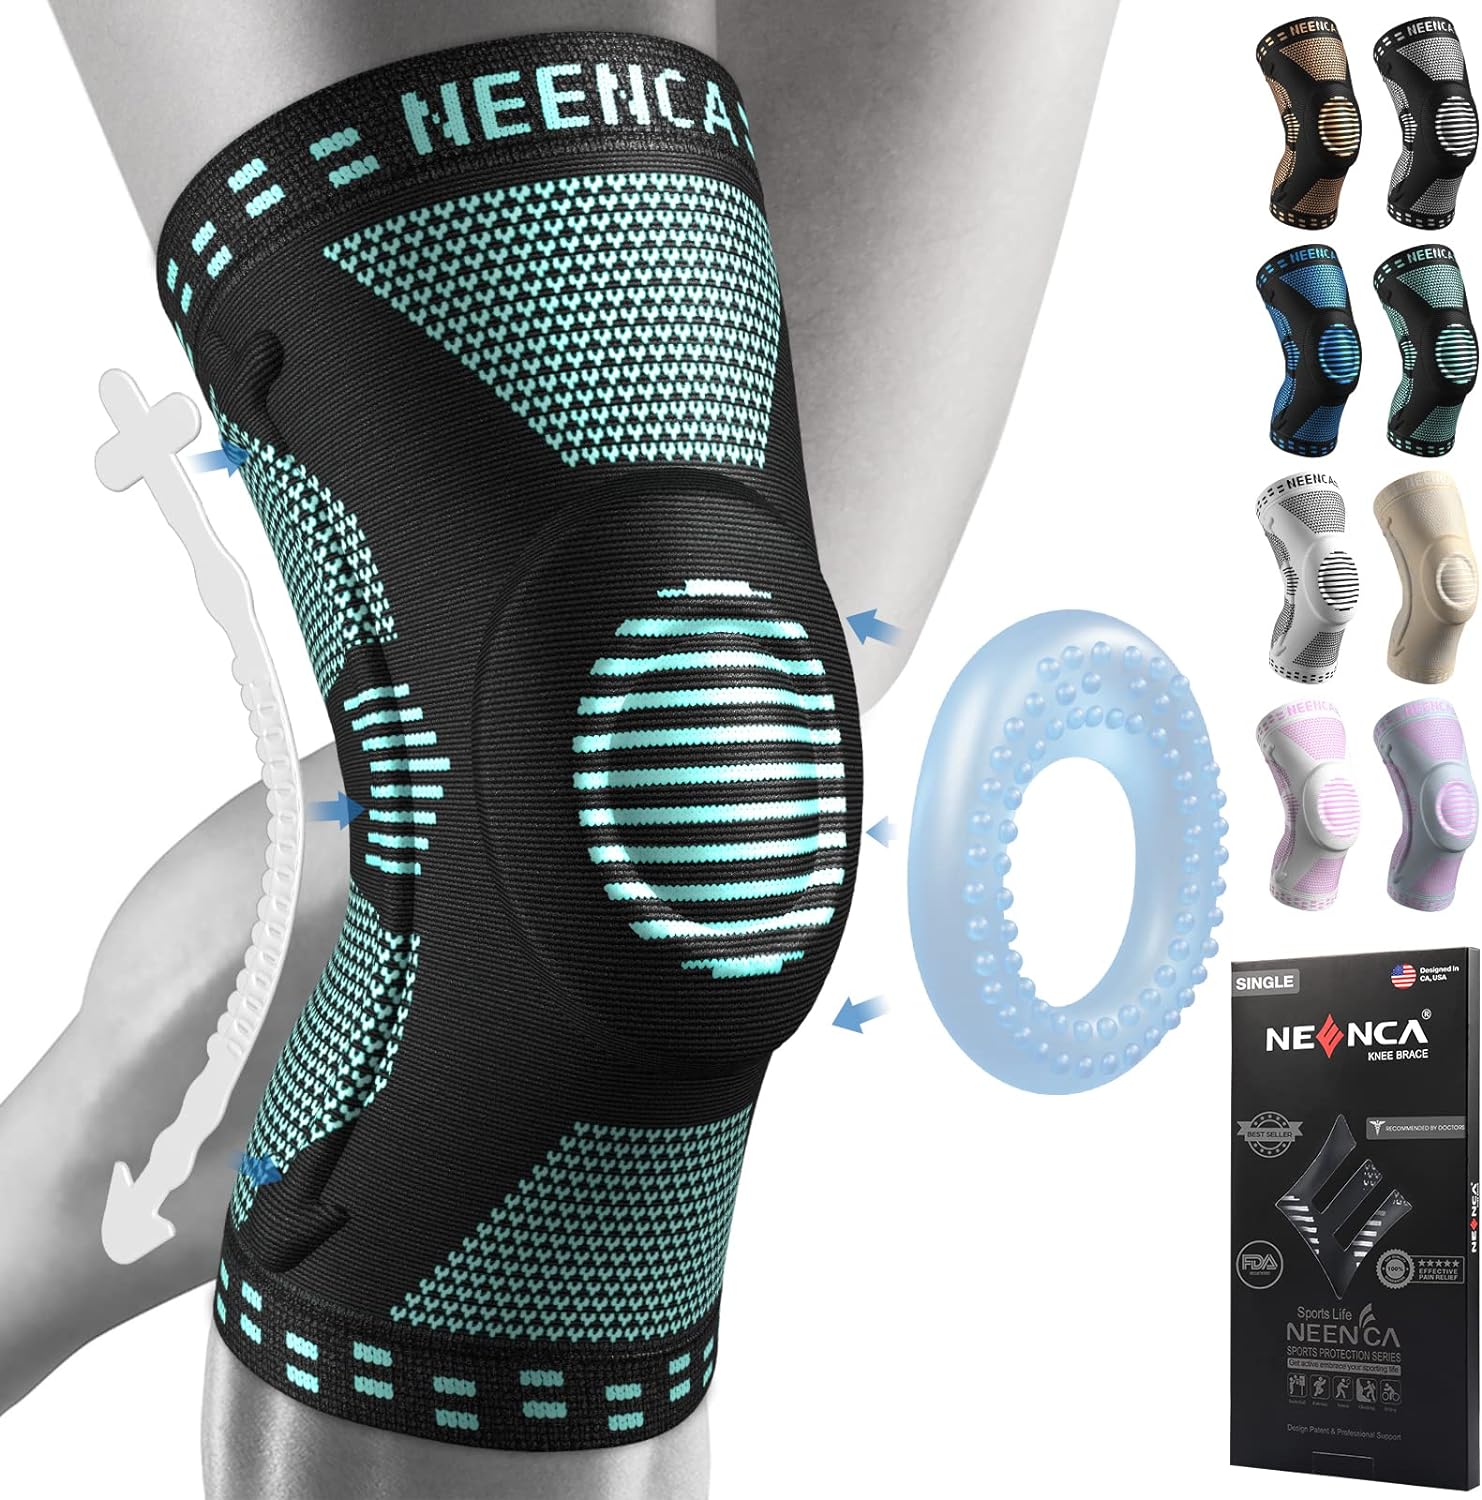 NEENCA Professional Knee Brace for Pain Relief, Medical Knee Support with Patella Pad Side Stabilizers, Compression Knee Sleeve for Meniscus Tear, ACL, Joint Pain, Runner, Workout - FSA/HSA APPROVED